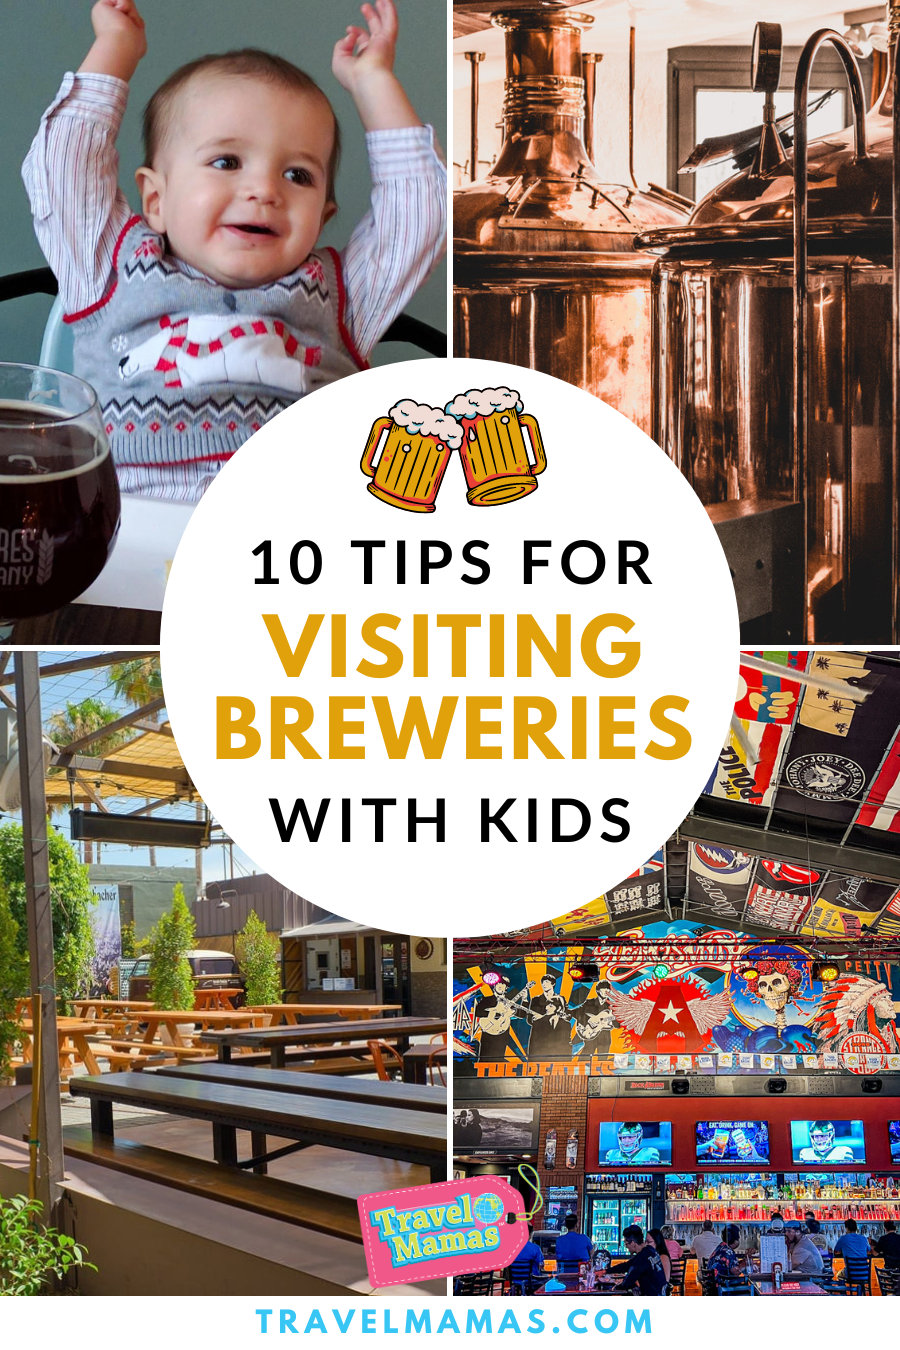 Tips for Visiting Breweries with Kids